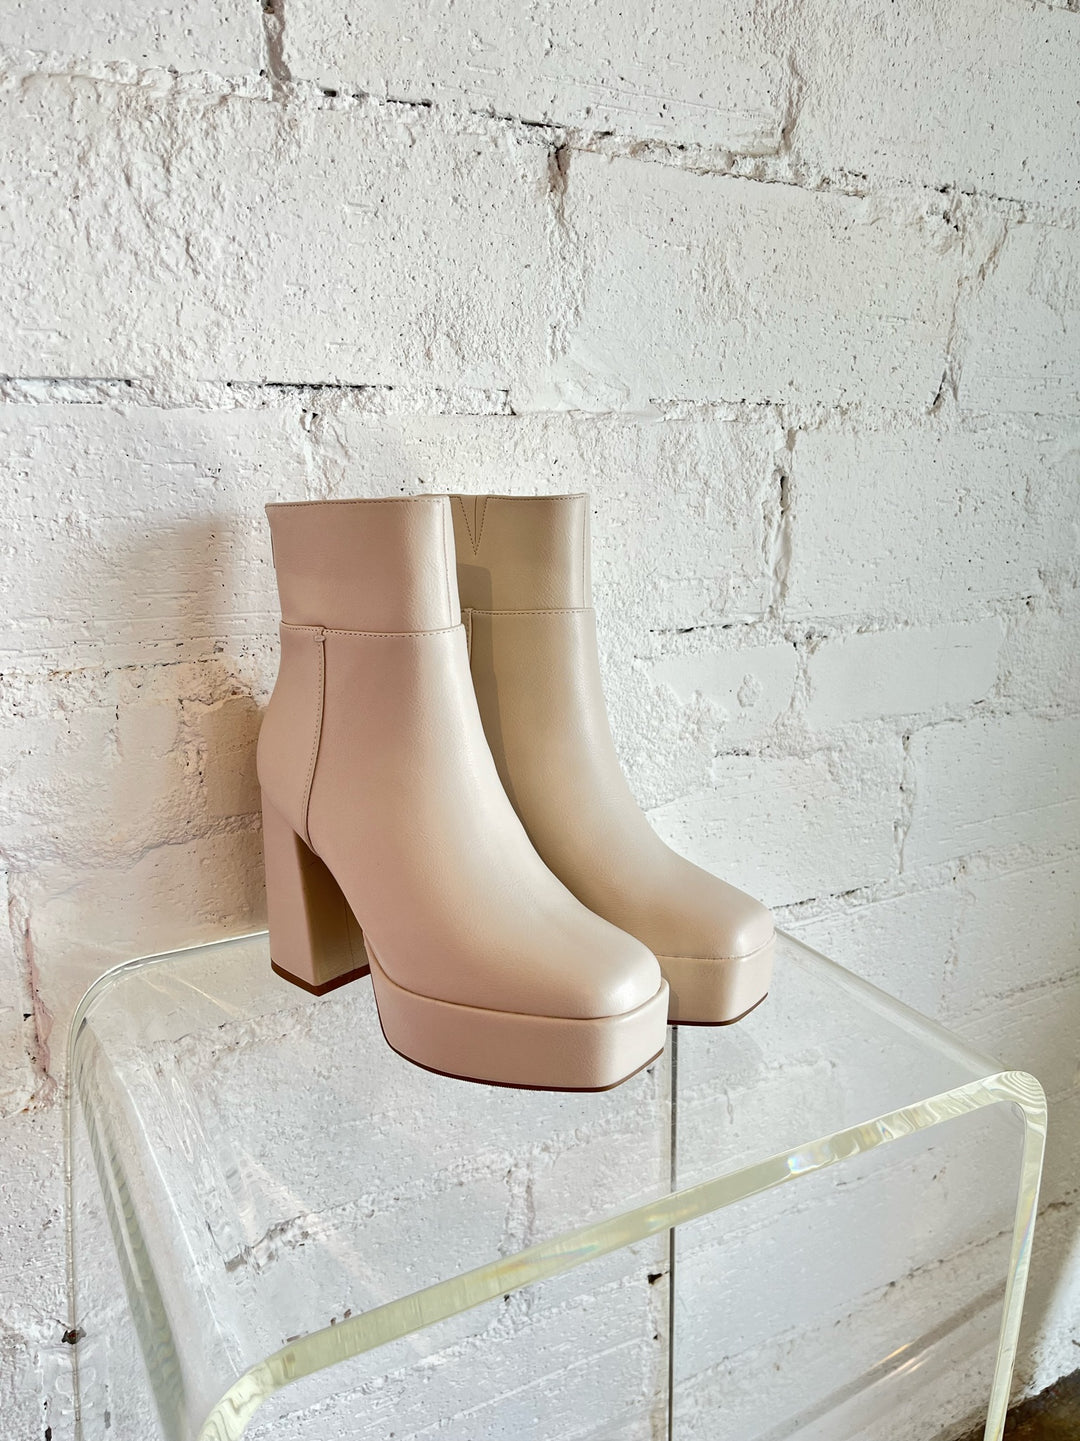 Chinese Laundry Norra Smooth Platform Boot, Shoes, Chinese Laundry, Adeline, dallas boutique, dallas texas, texas boutique, women's boutique dallas, adeline boutique, dallas boutique, trendy boutique, affordable boutique